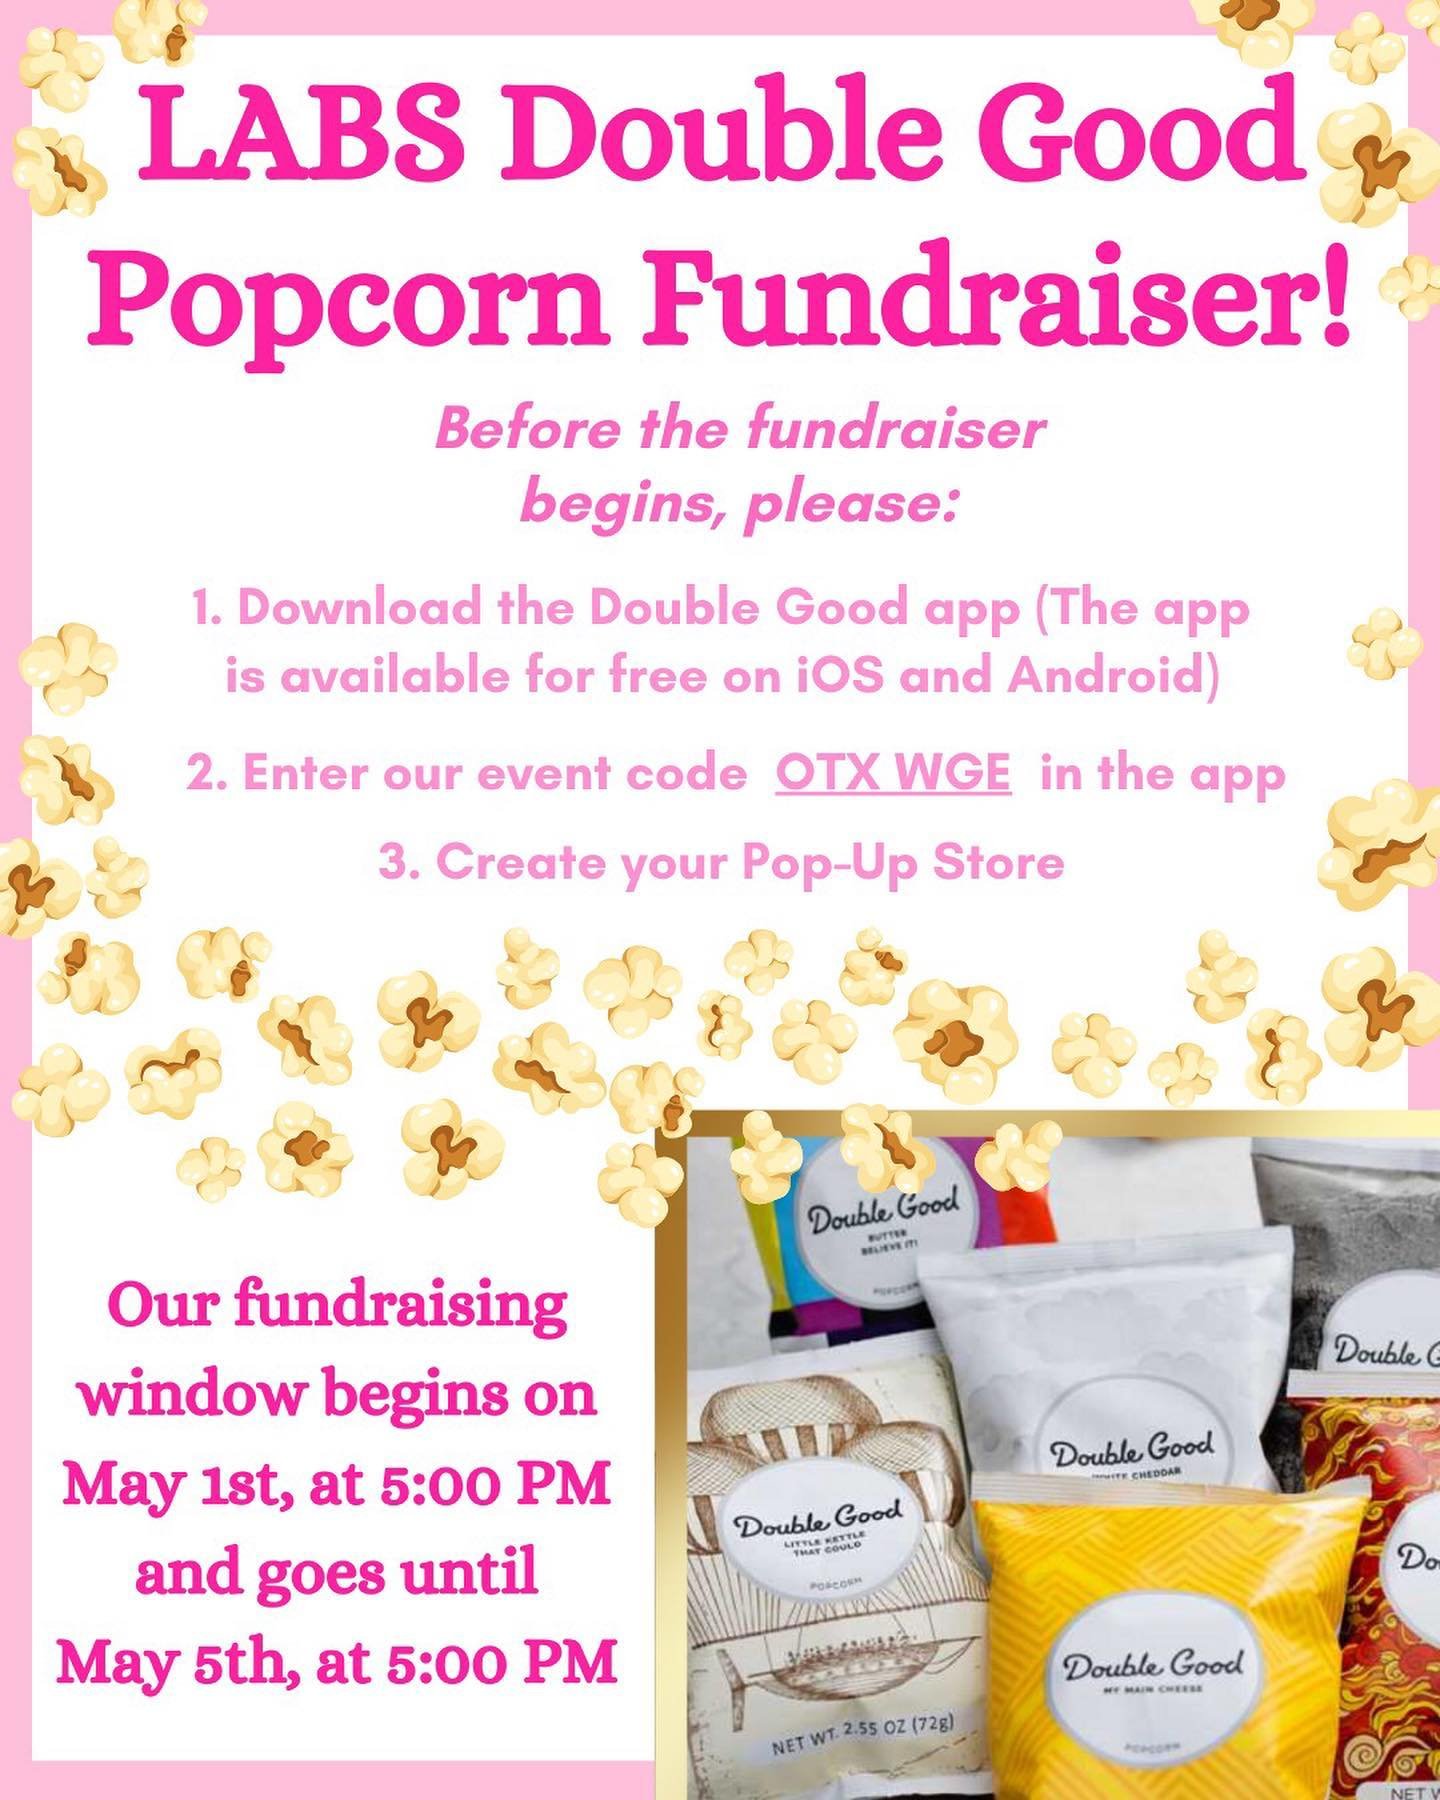 || Double Good Popcorn Fundraiser!🍿||

We are bringing back the Double Good Popcorn Fundraiser to raise money for our upcoming LABS Spring performance of LABS Presents the Classics! Double Good Popcorn is our most delicious fundraiser in which dance